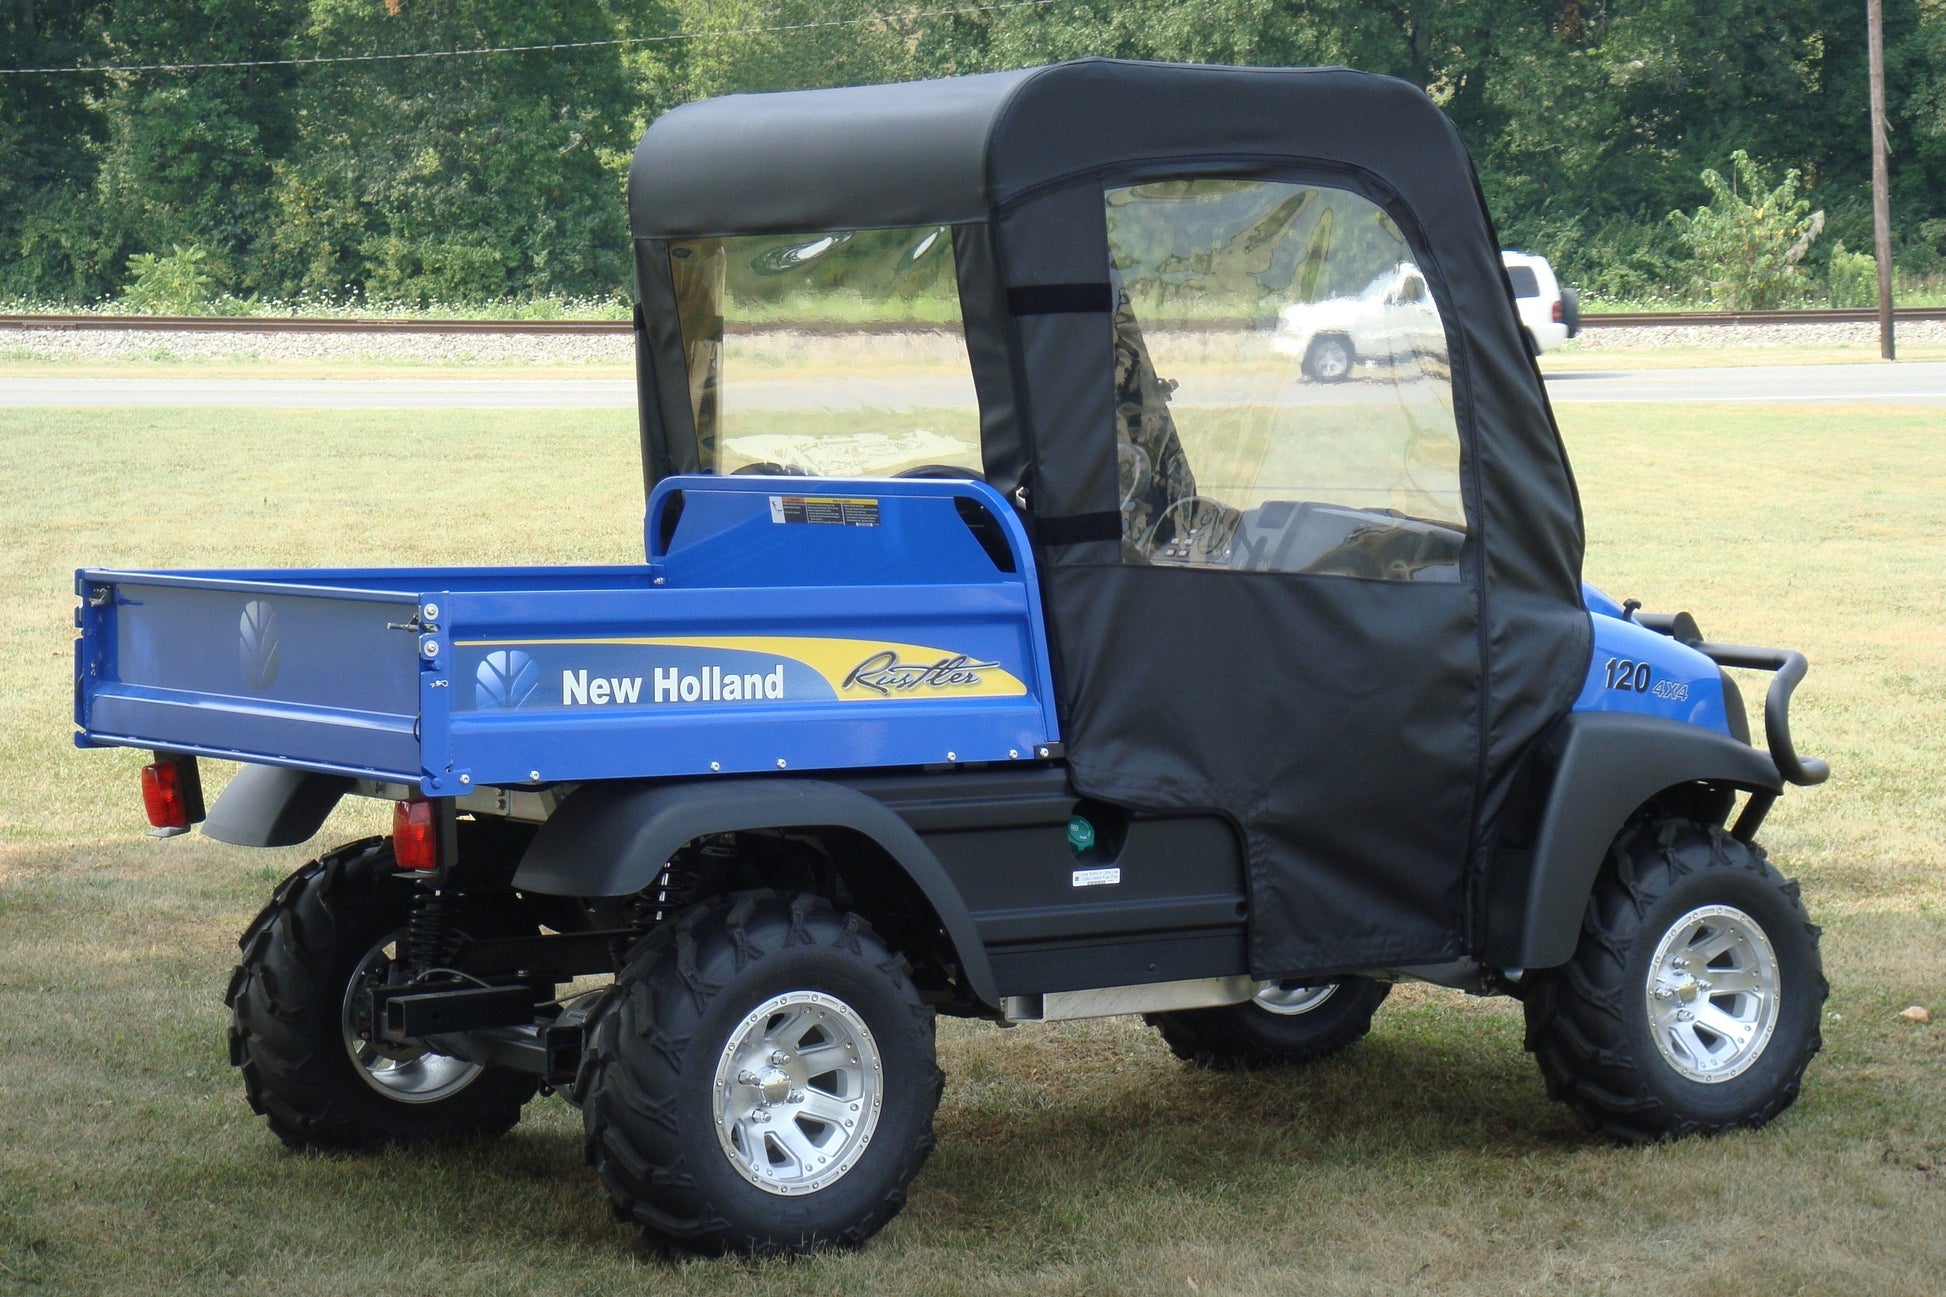 New Holland Rustler 120/125 - Full Cab for Hard Windshield with Color and Zip Window Options - 3 Star UTV